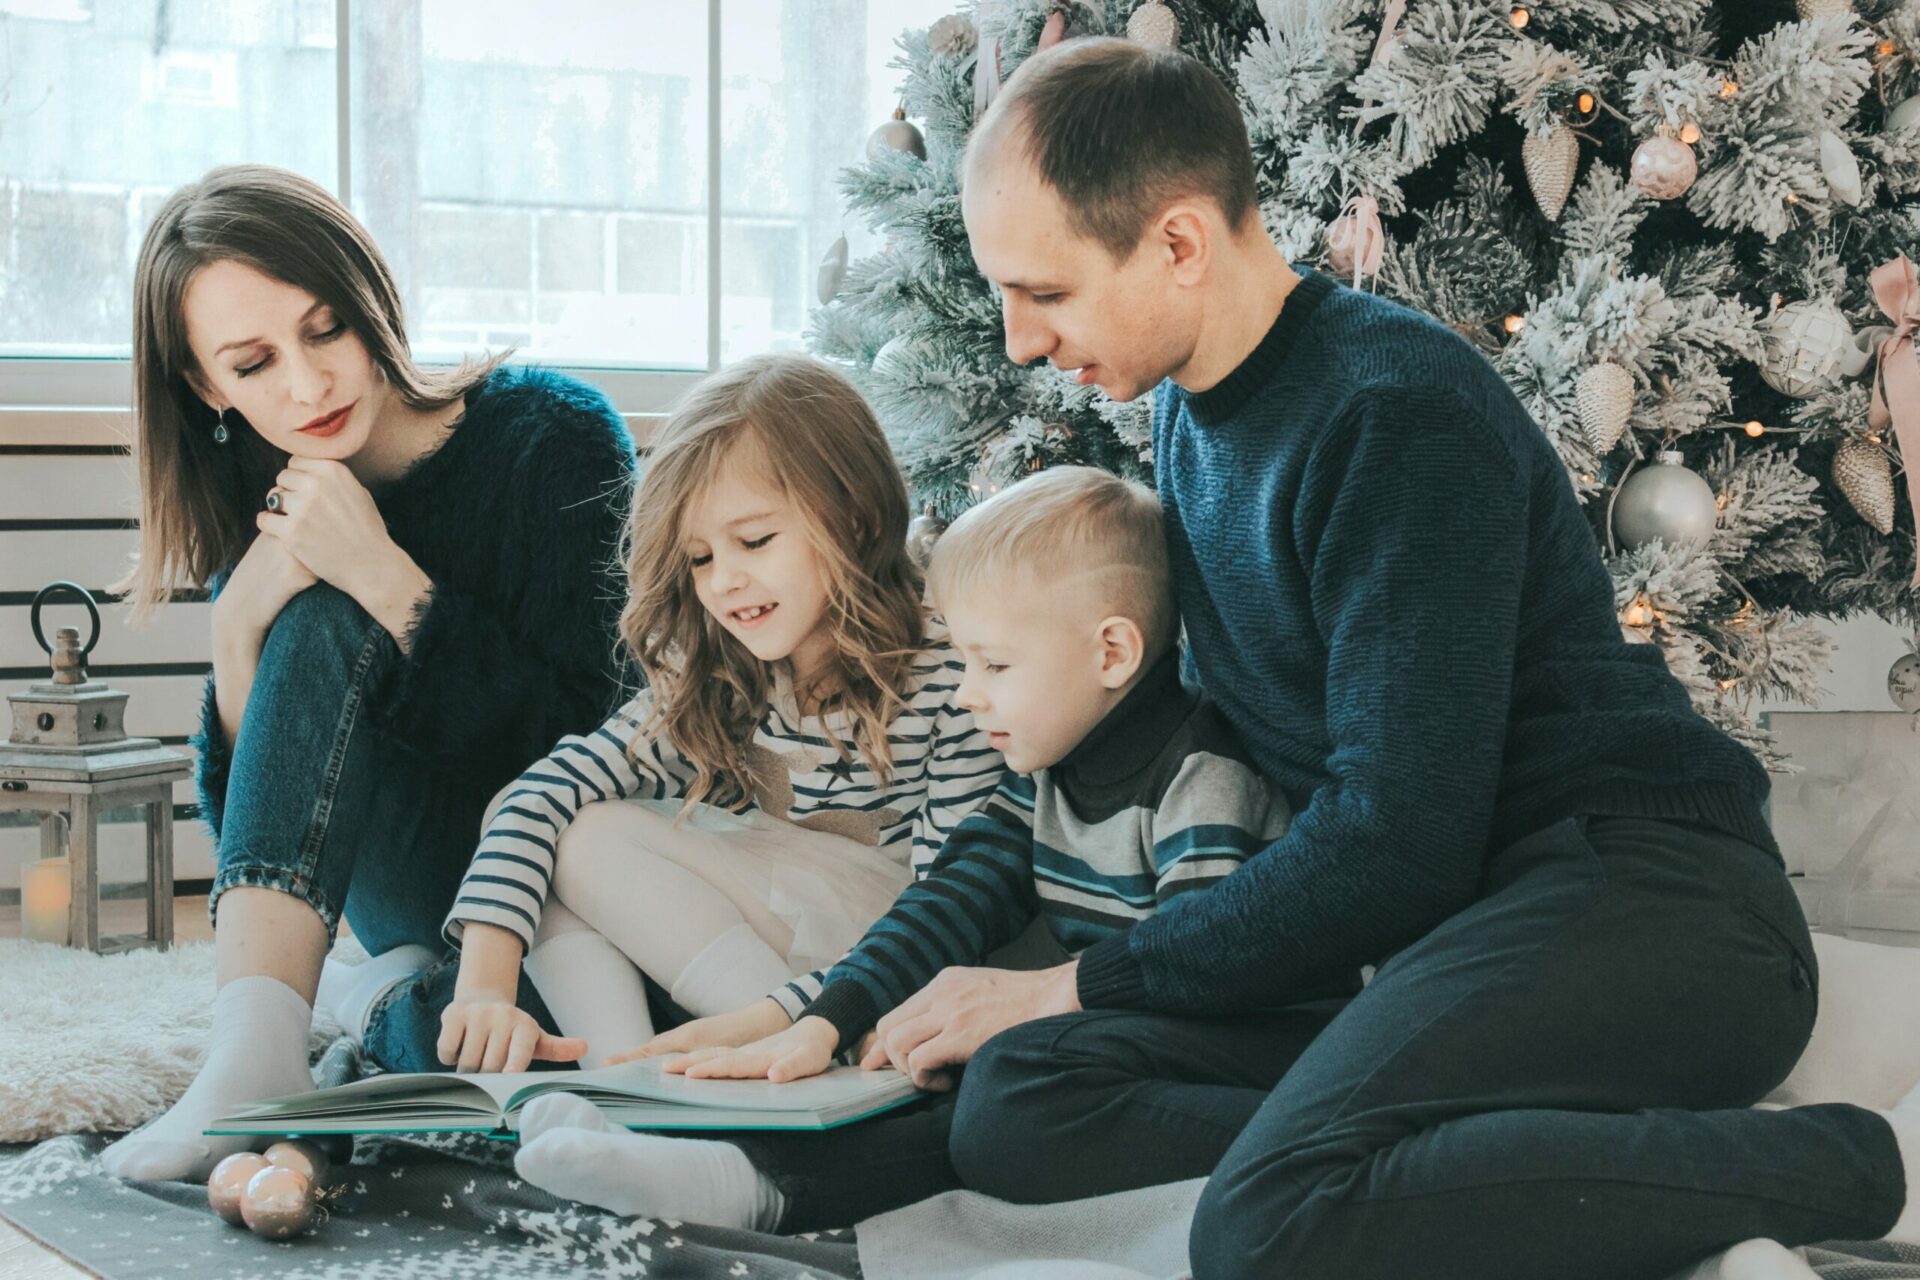 A family with two young children enjoying a Christmas storybook together in a cozy, festively decorated room.